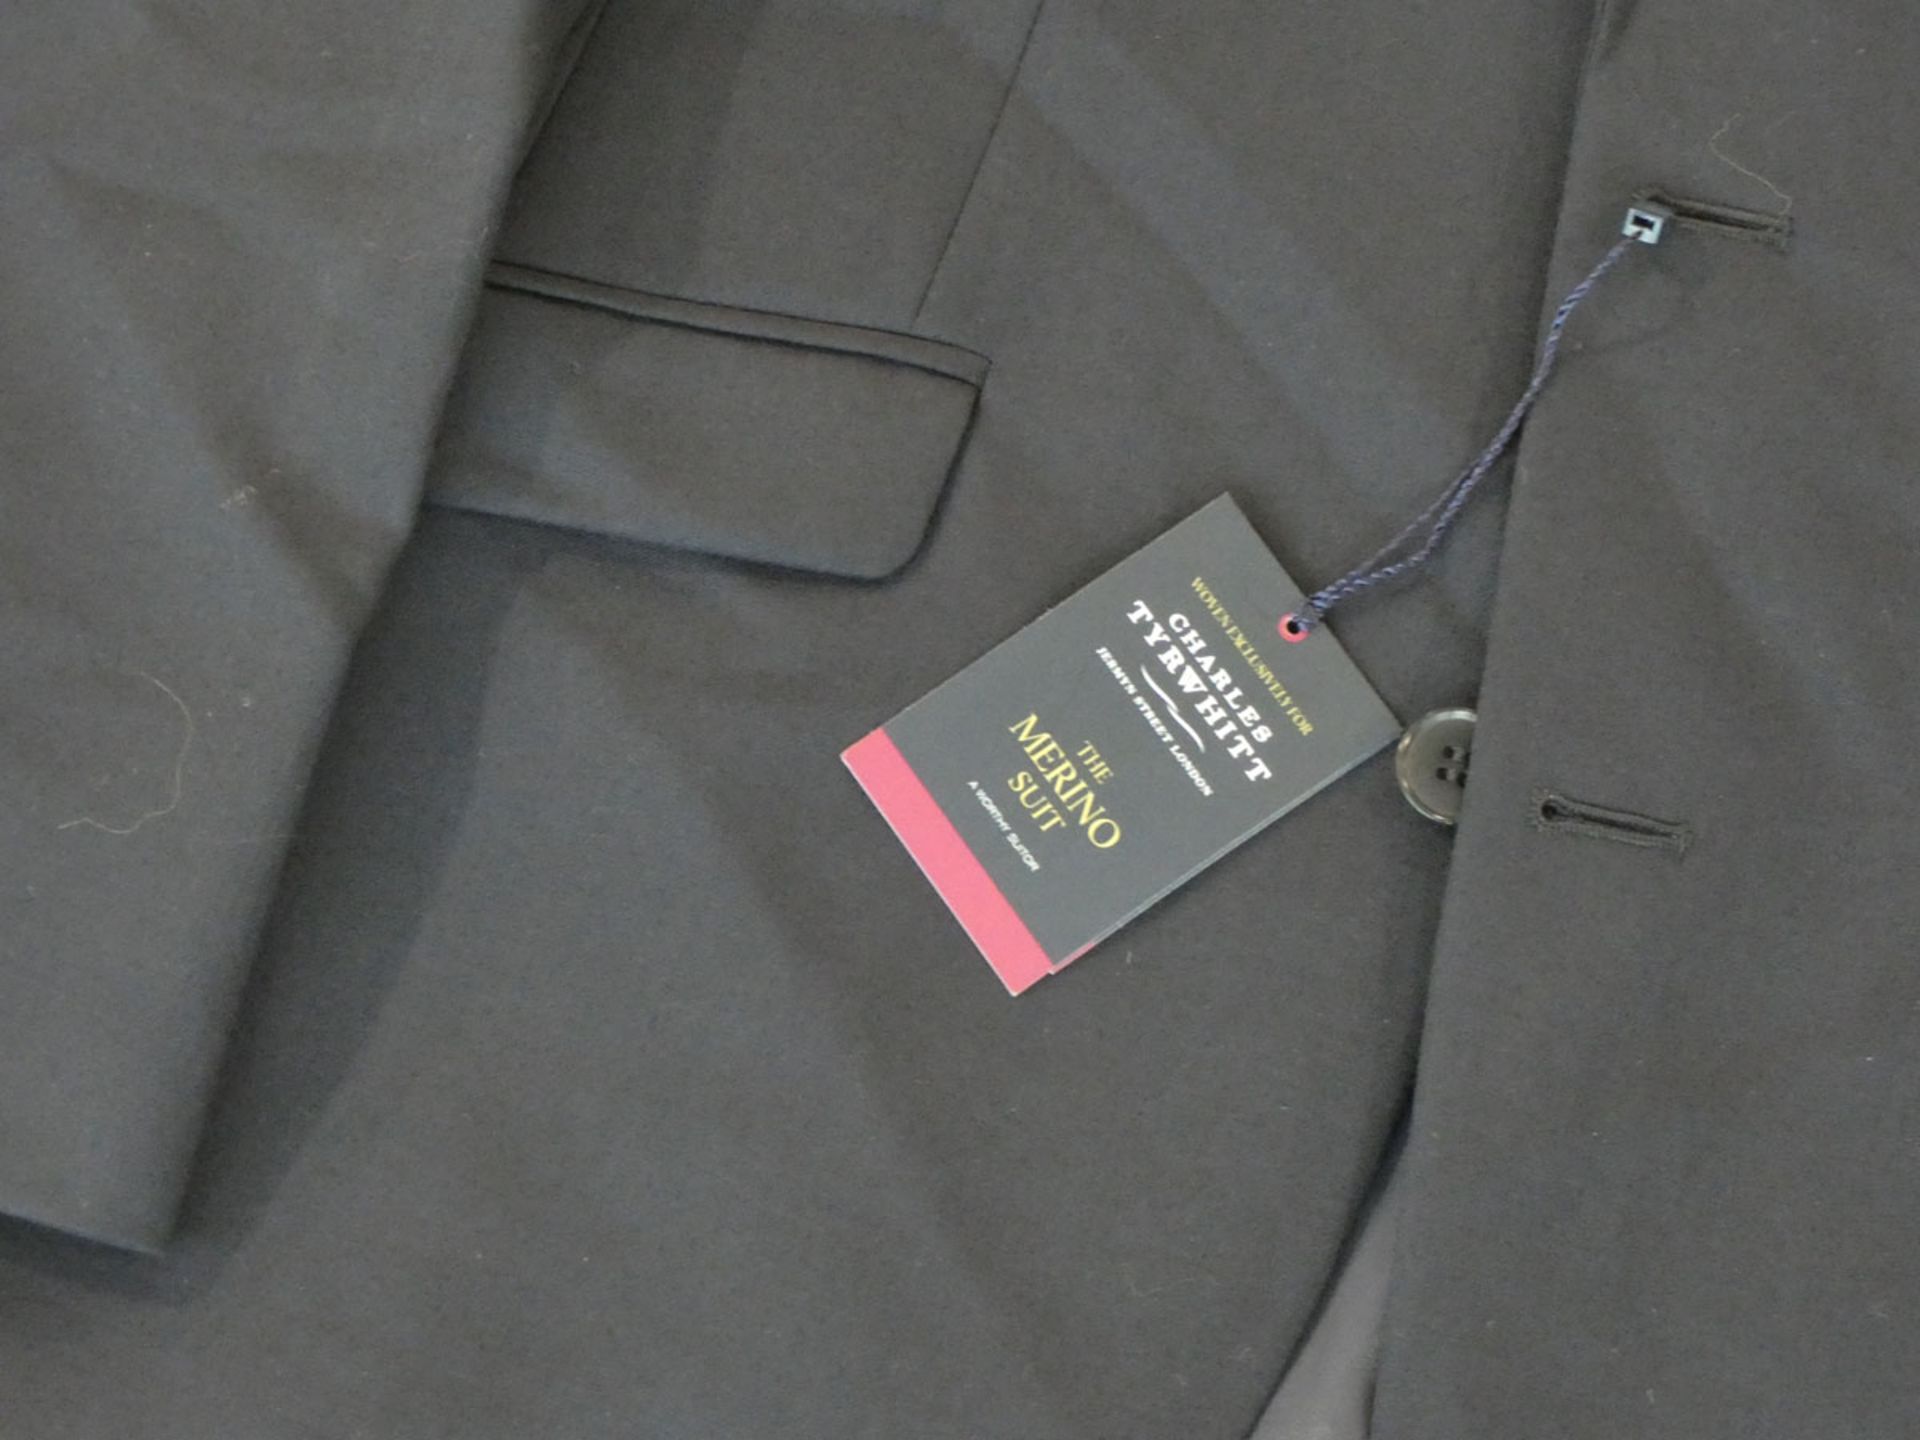 Charles Tyrwhitt the merino suit midnight extra slim fit jacket size 38S and trouser size 3032 set - Image 2 of 2